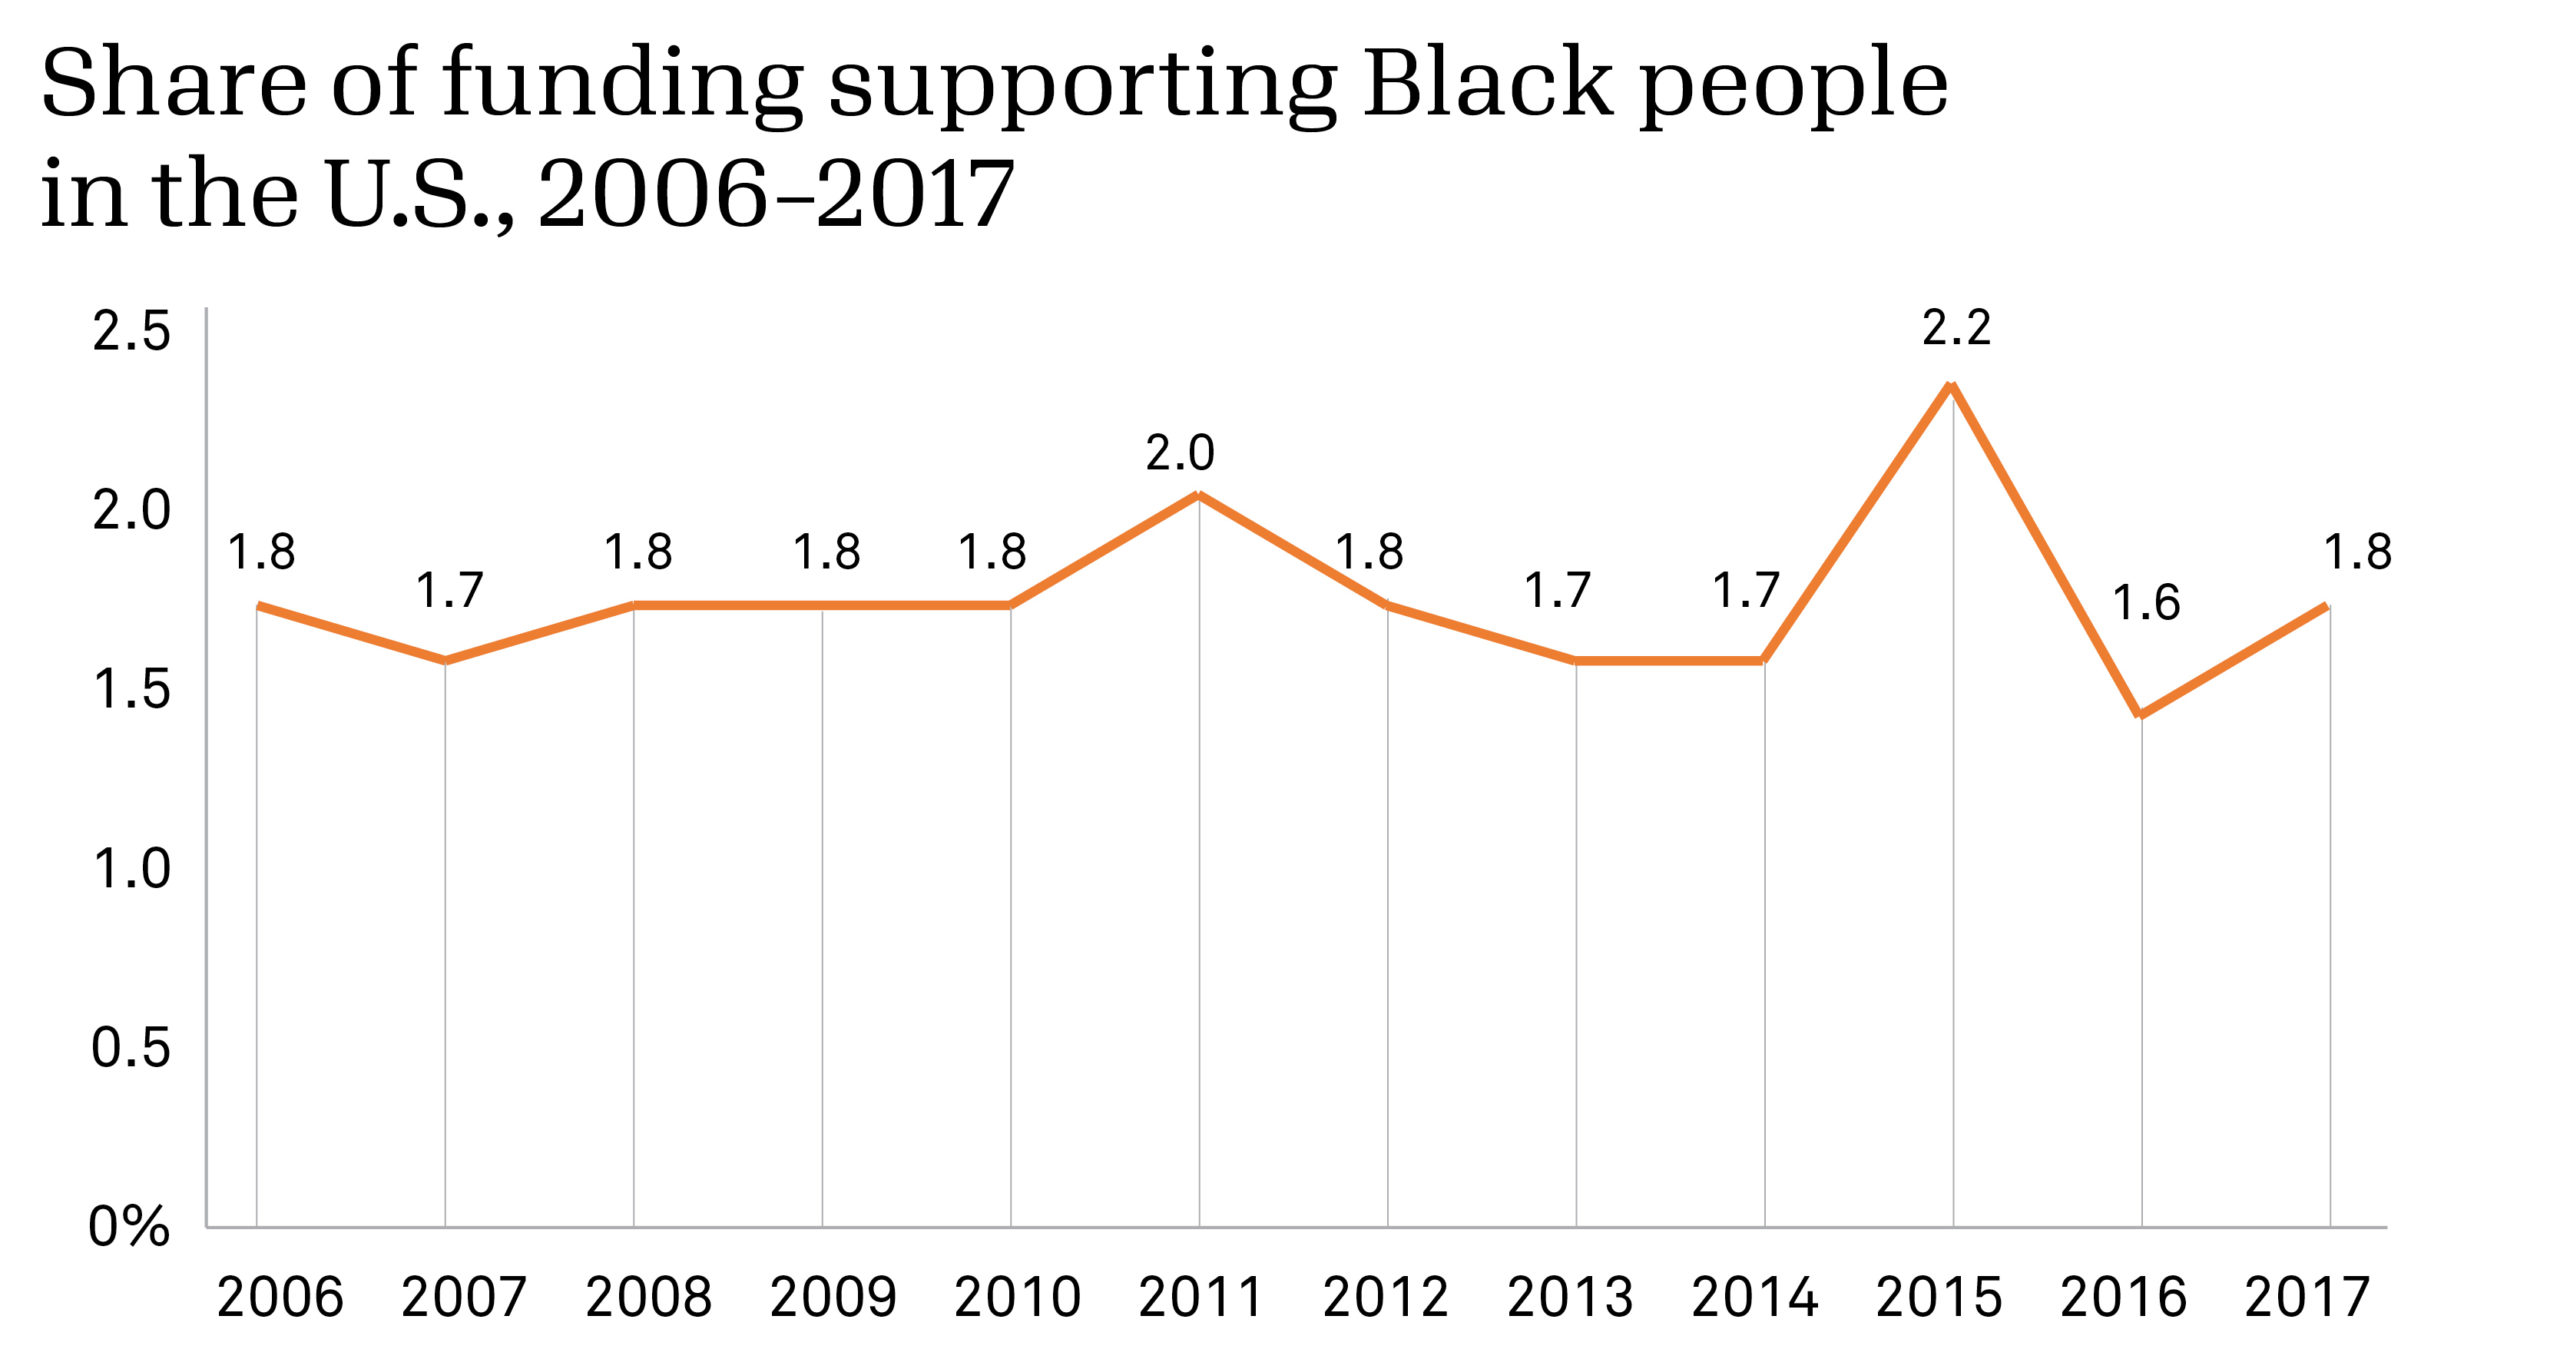 Share of funding supporting Black people in the U.S., 2006-2017